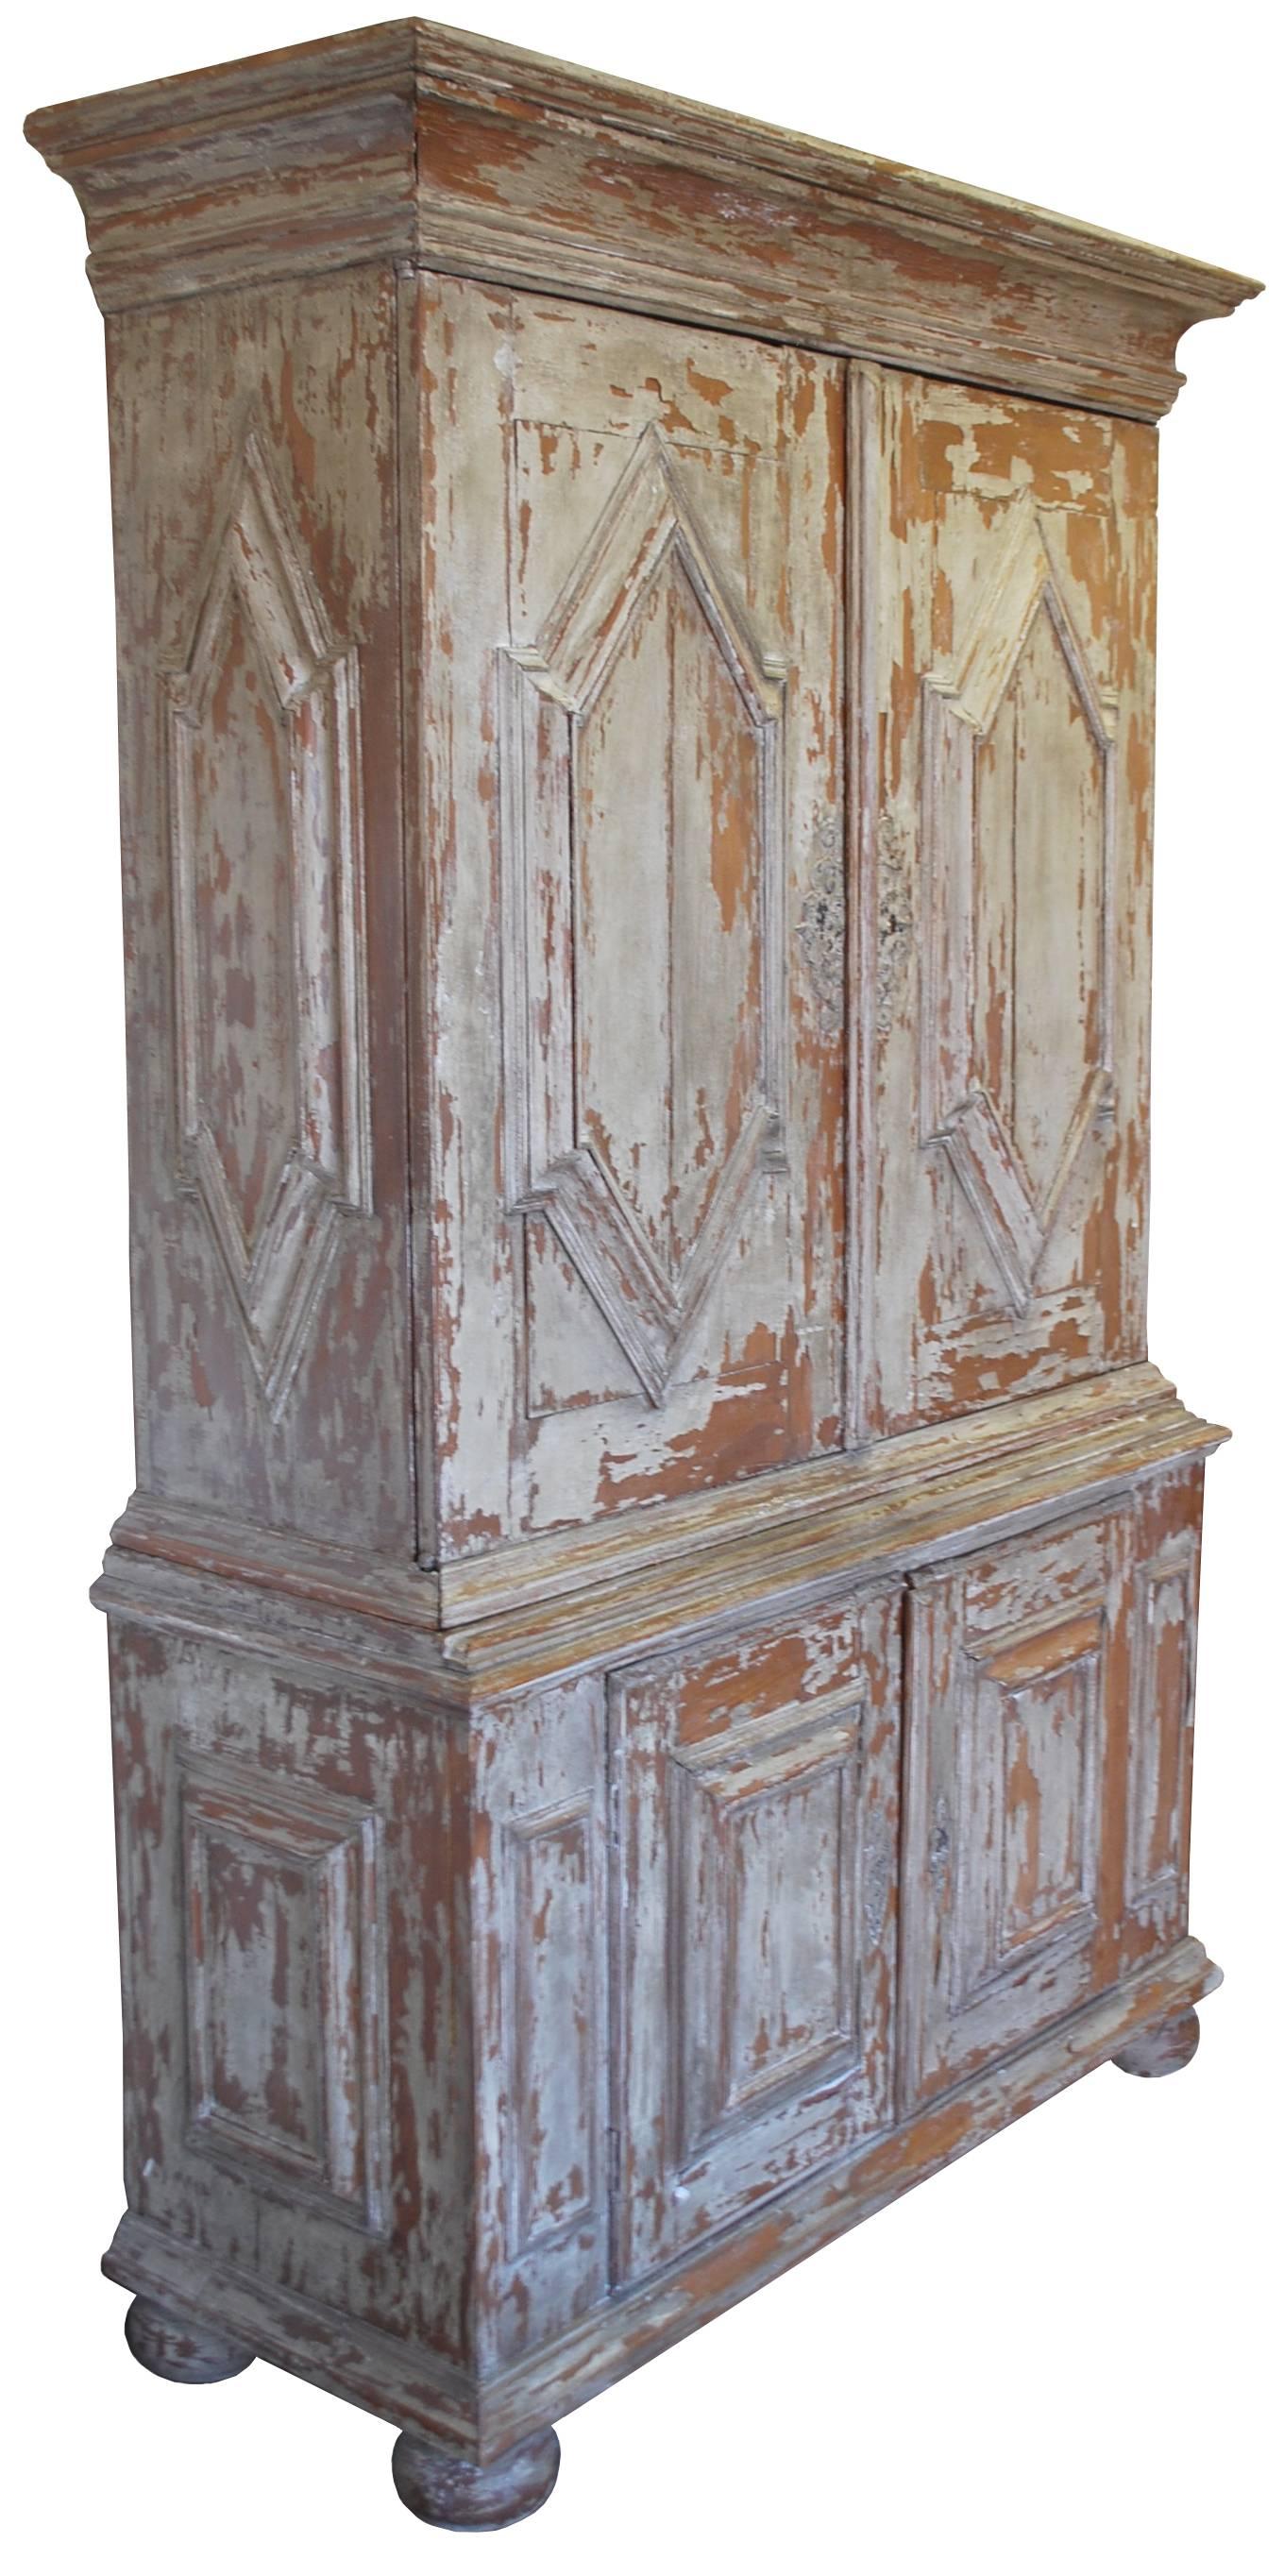 French antique hutch with original hardware and paint. Paint is fragile and inherent to the wear of the piece over time. Please see additional images.